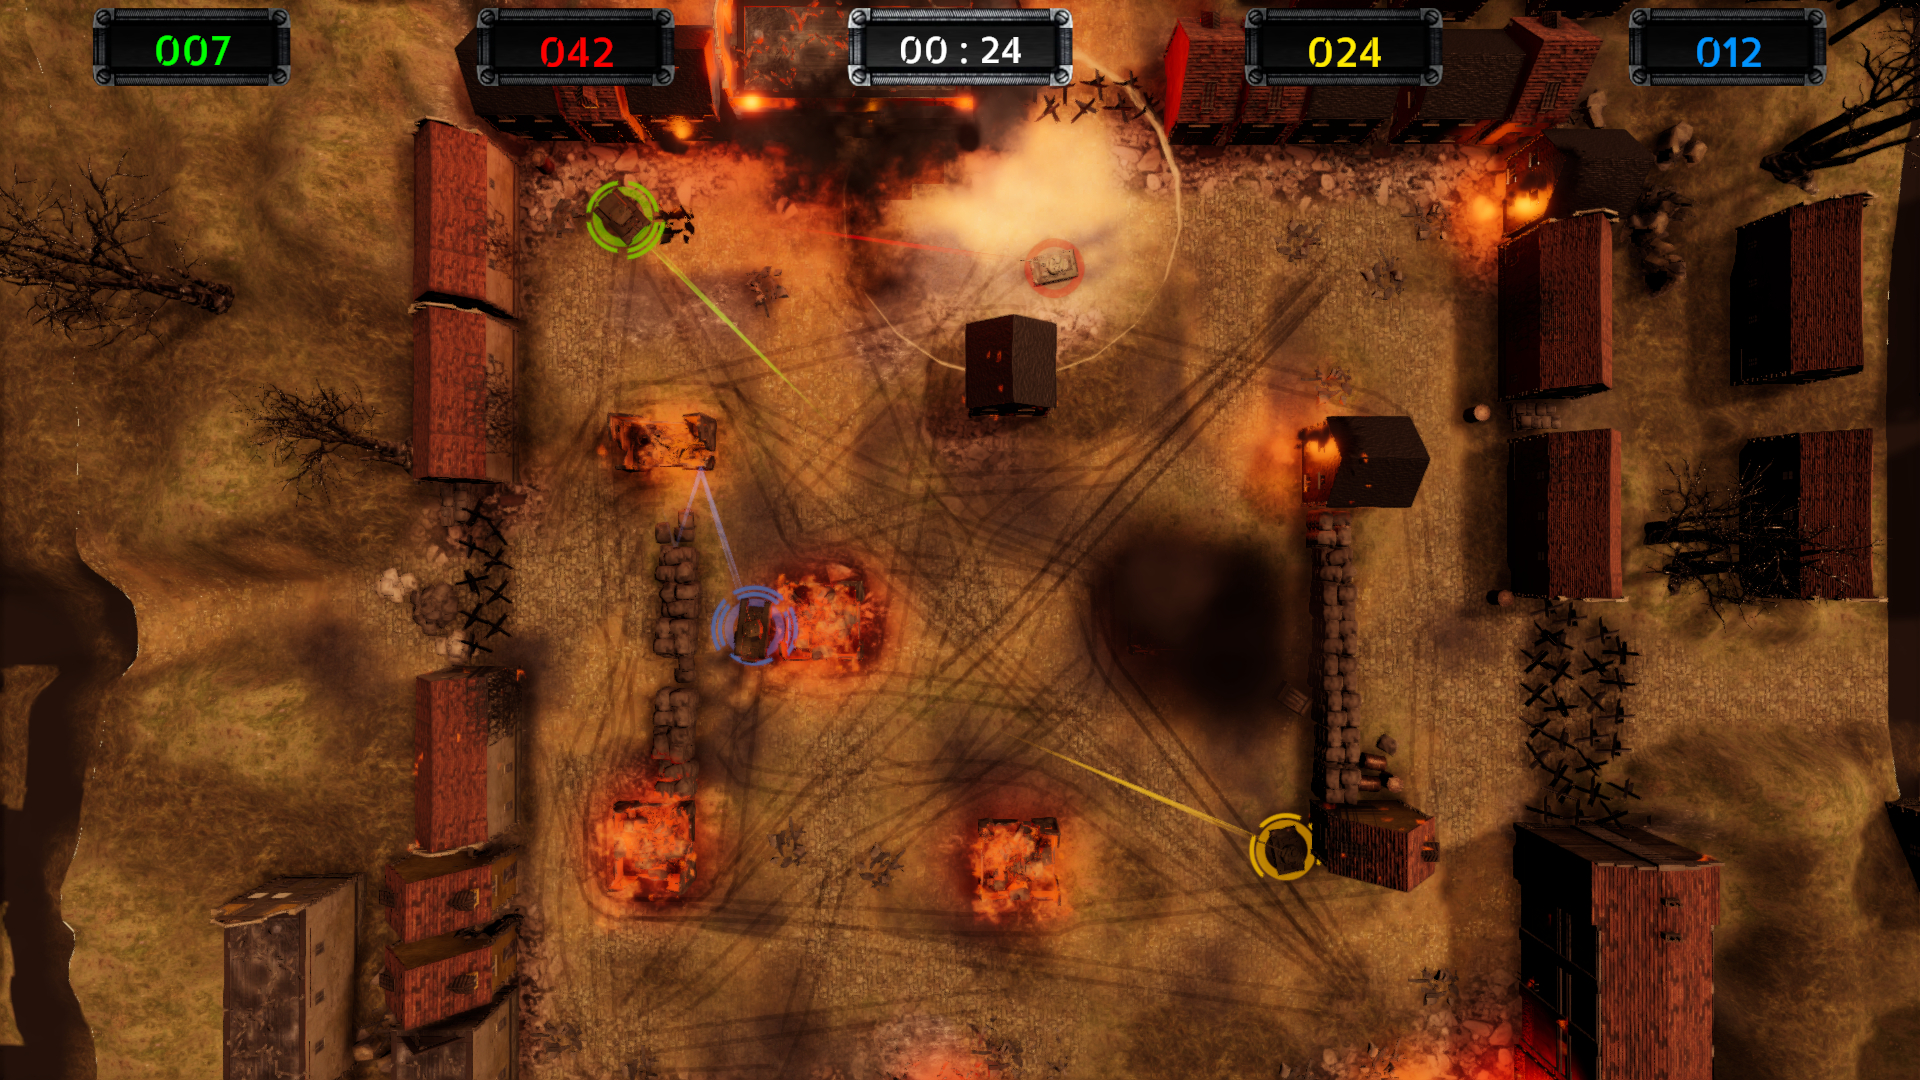 Screenshot of an Armor of Heroes match, in which four tanks are seen colliding with each other